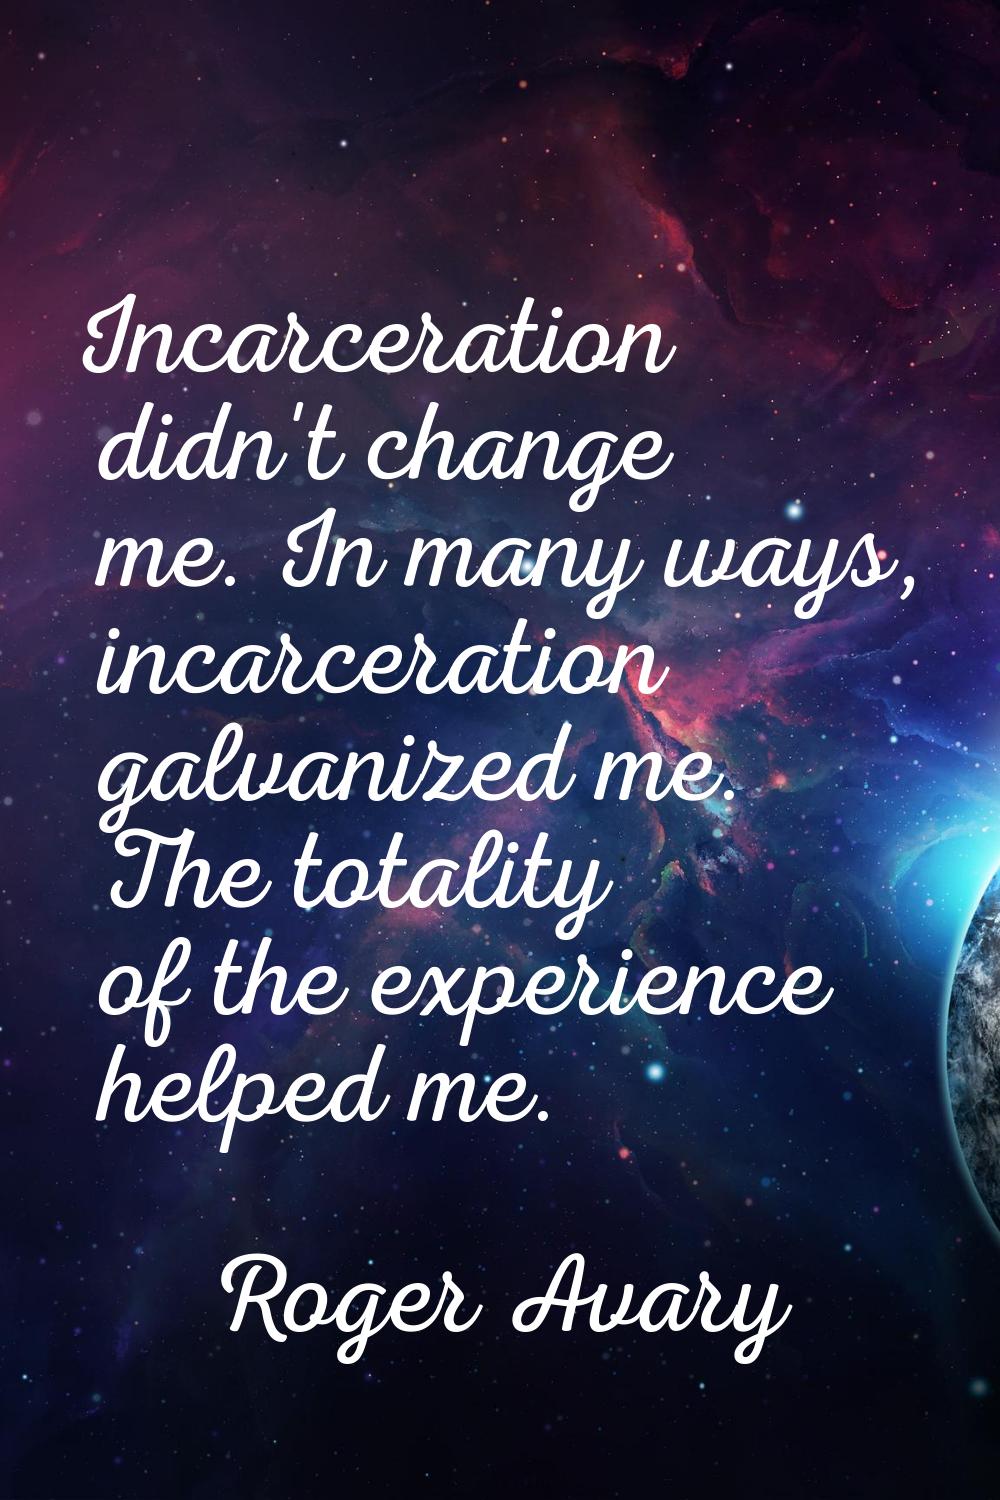 Incarceration didn't change me. In many ways, incarceration galvanized me. The totality of the expe